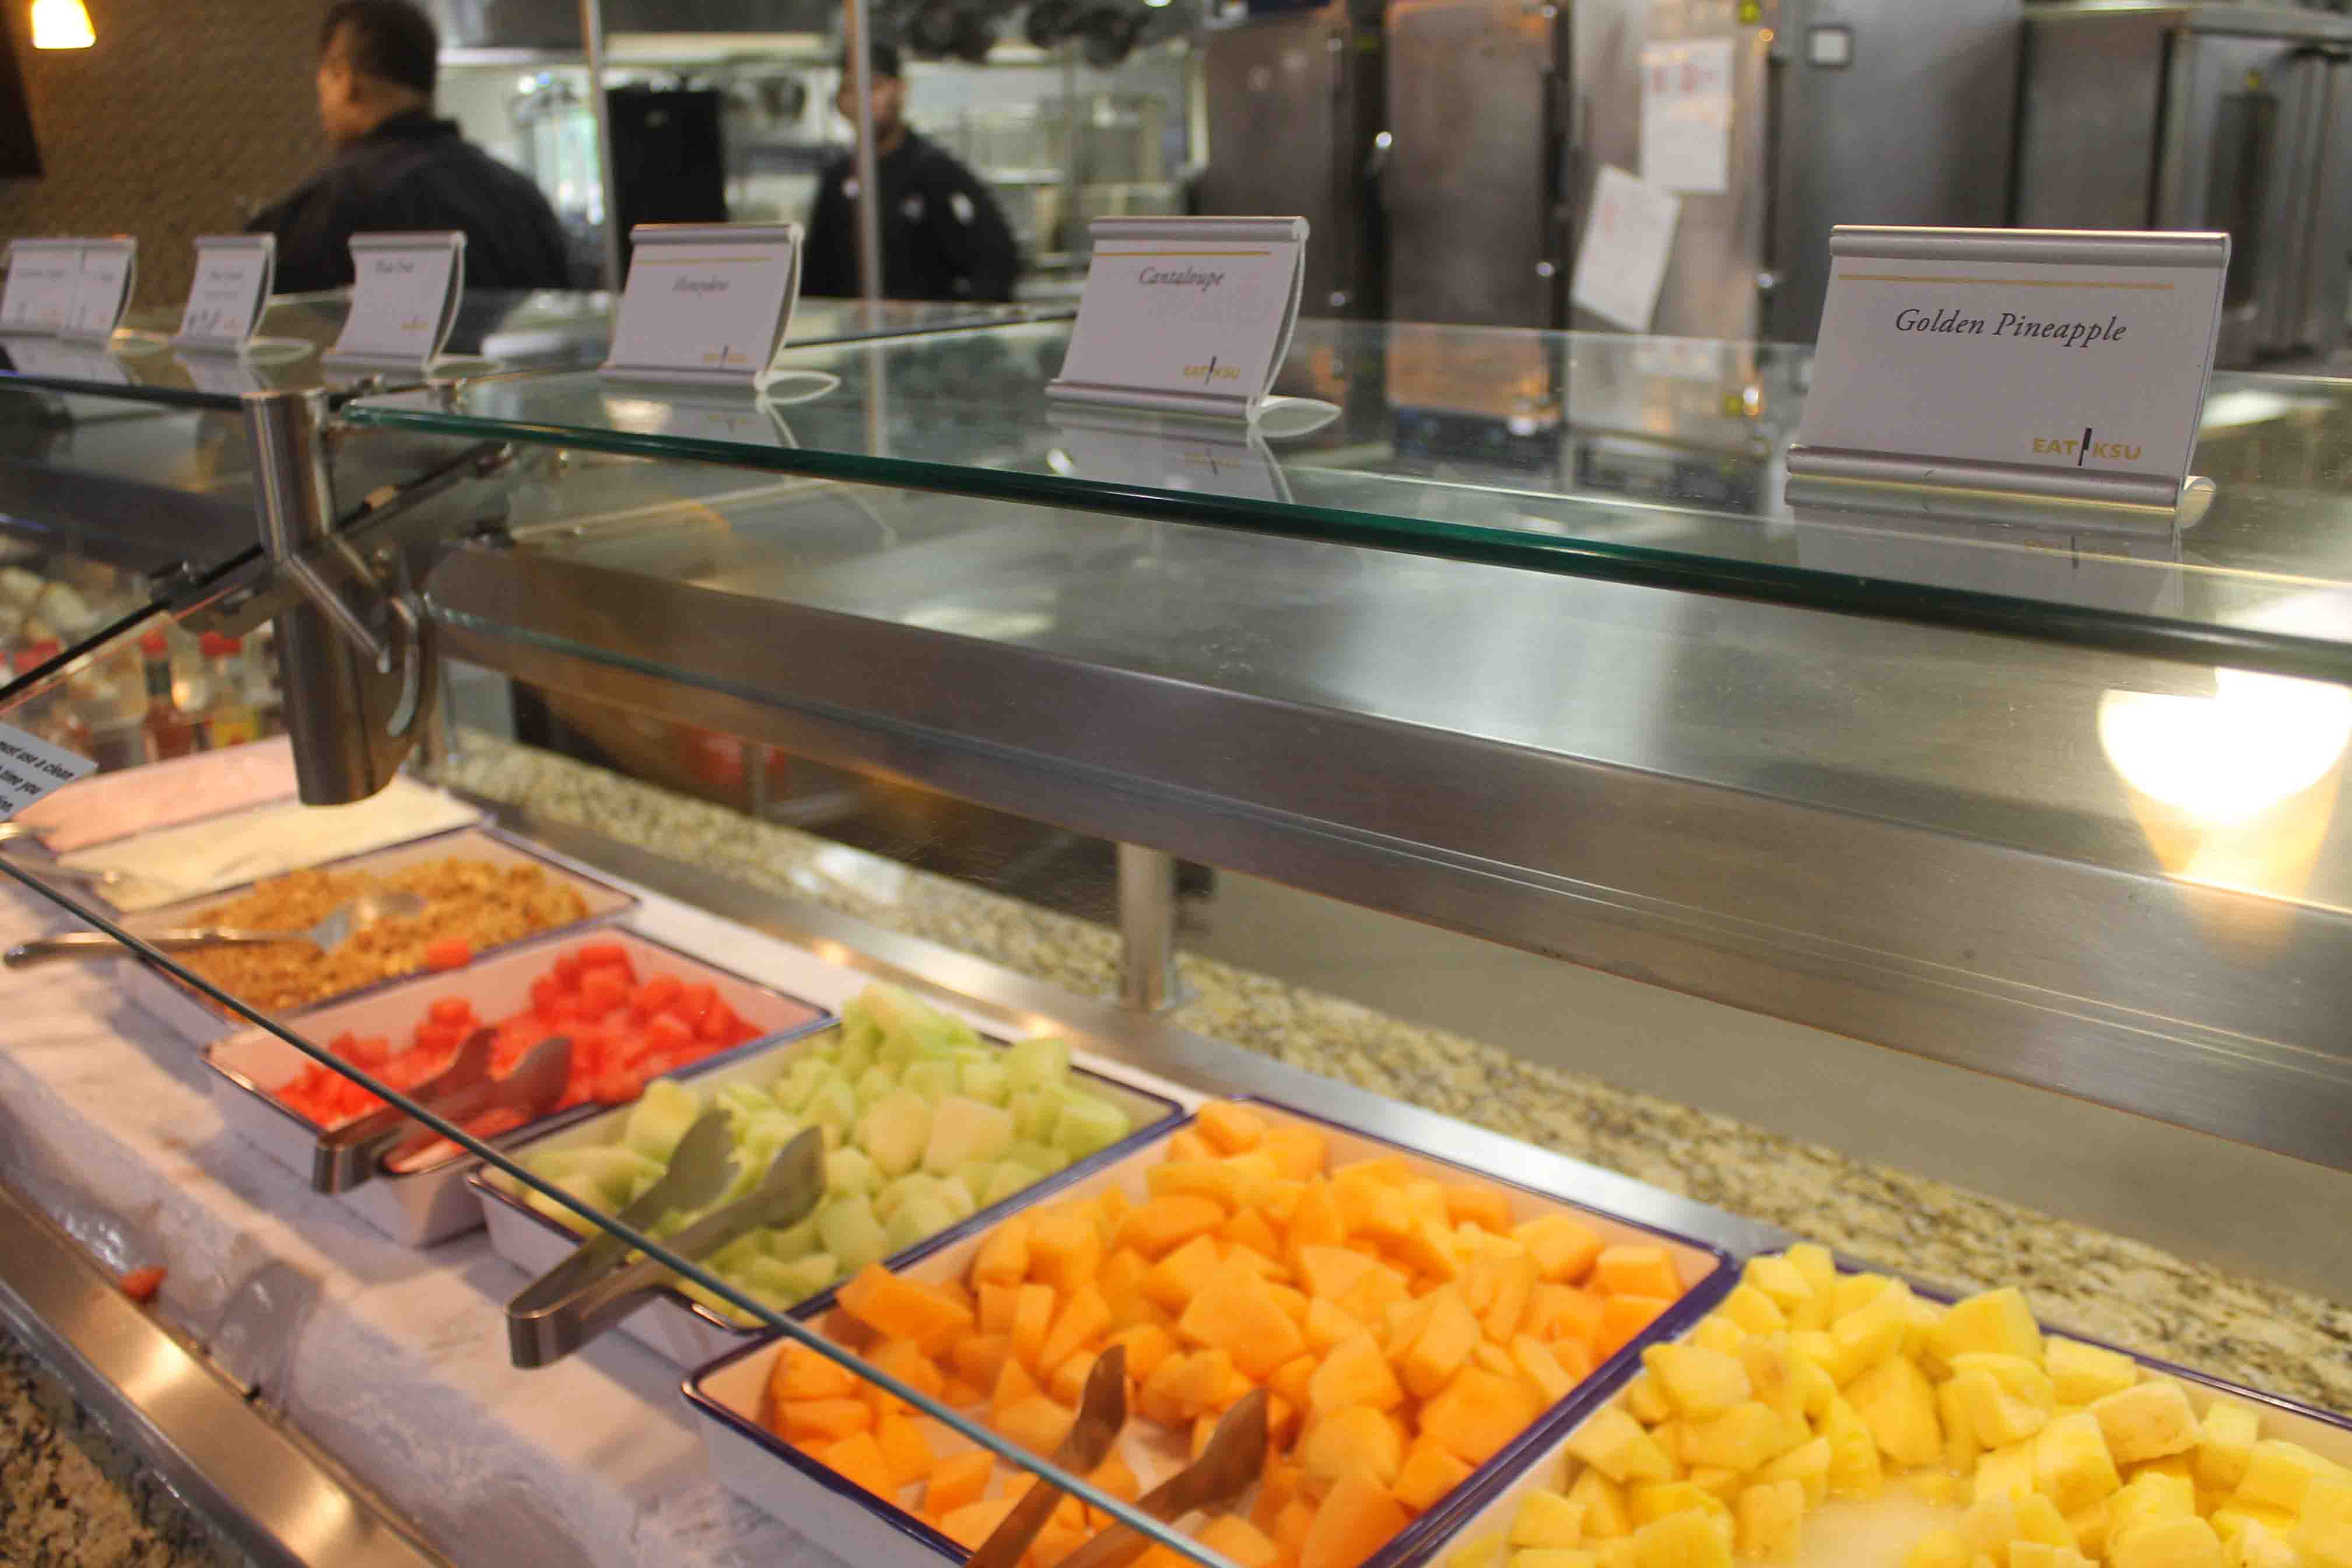 OPINION: Campus eateries should display nutrition labels